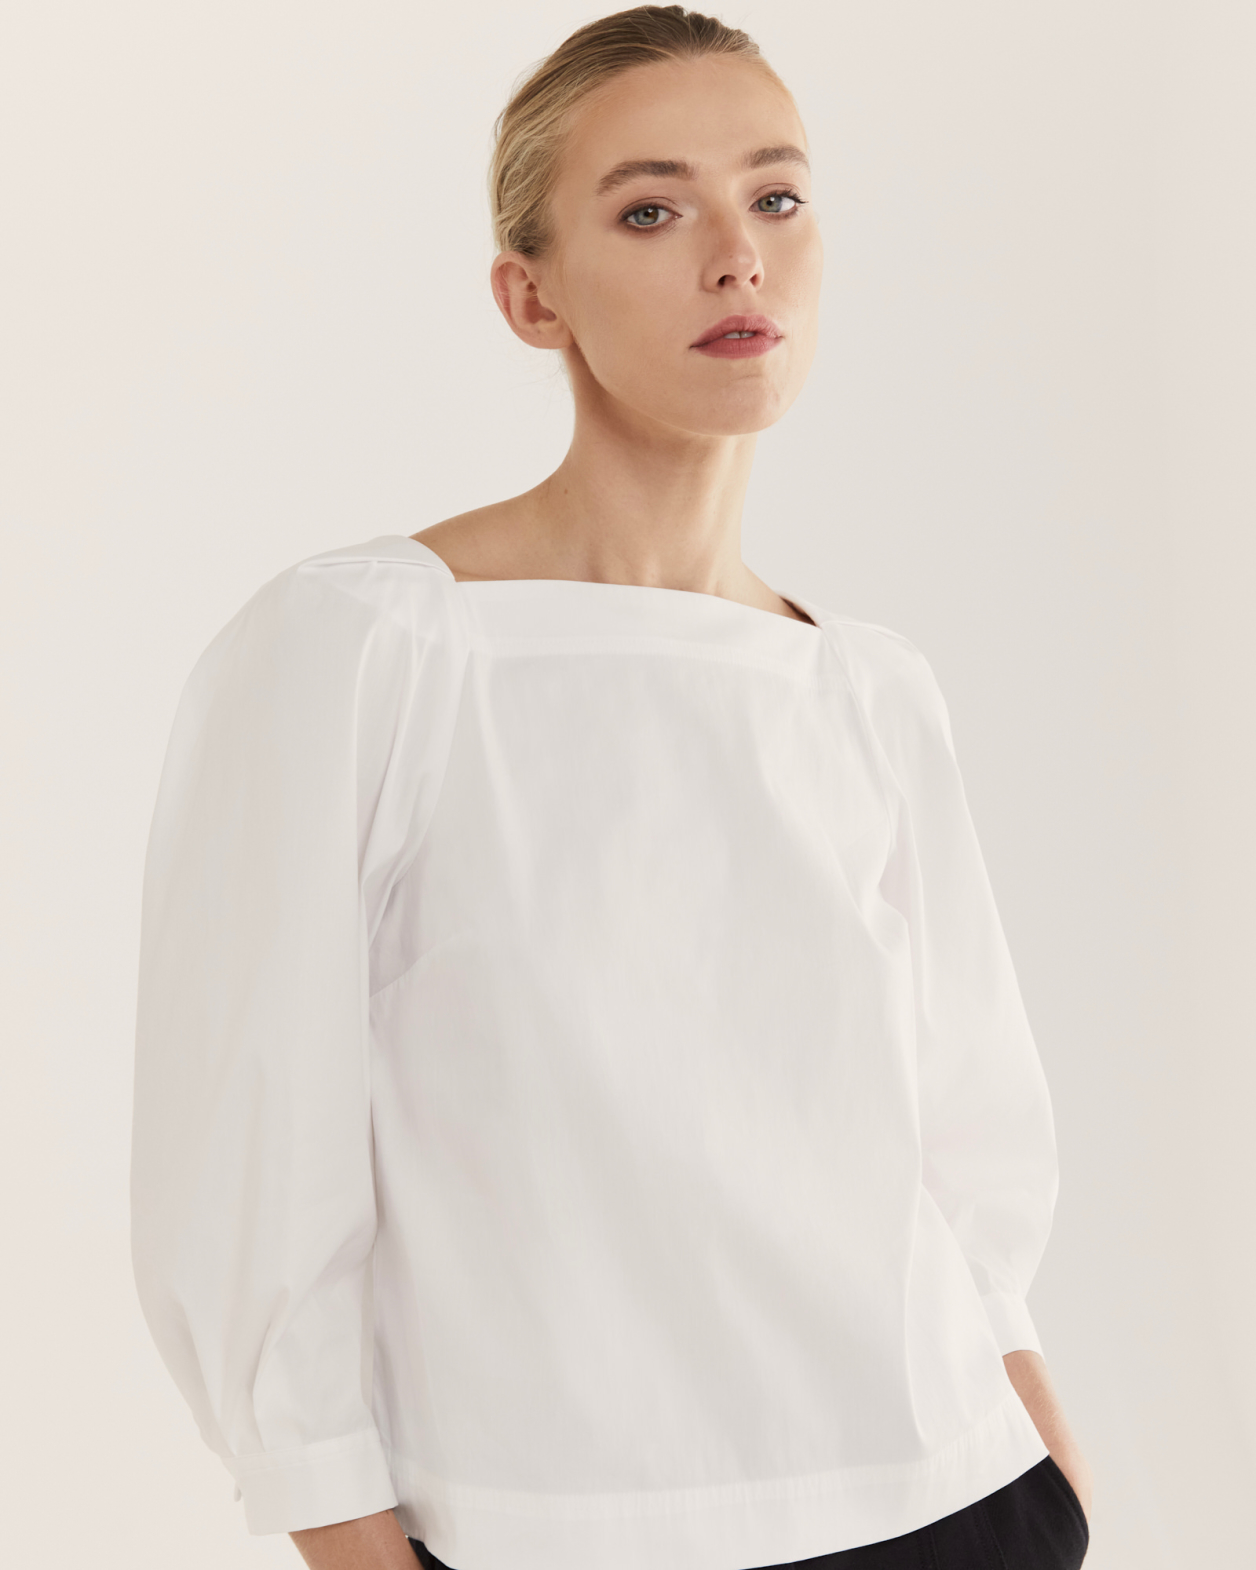 Piper Pleat Sleeve Top in WHITE